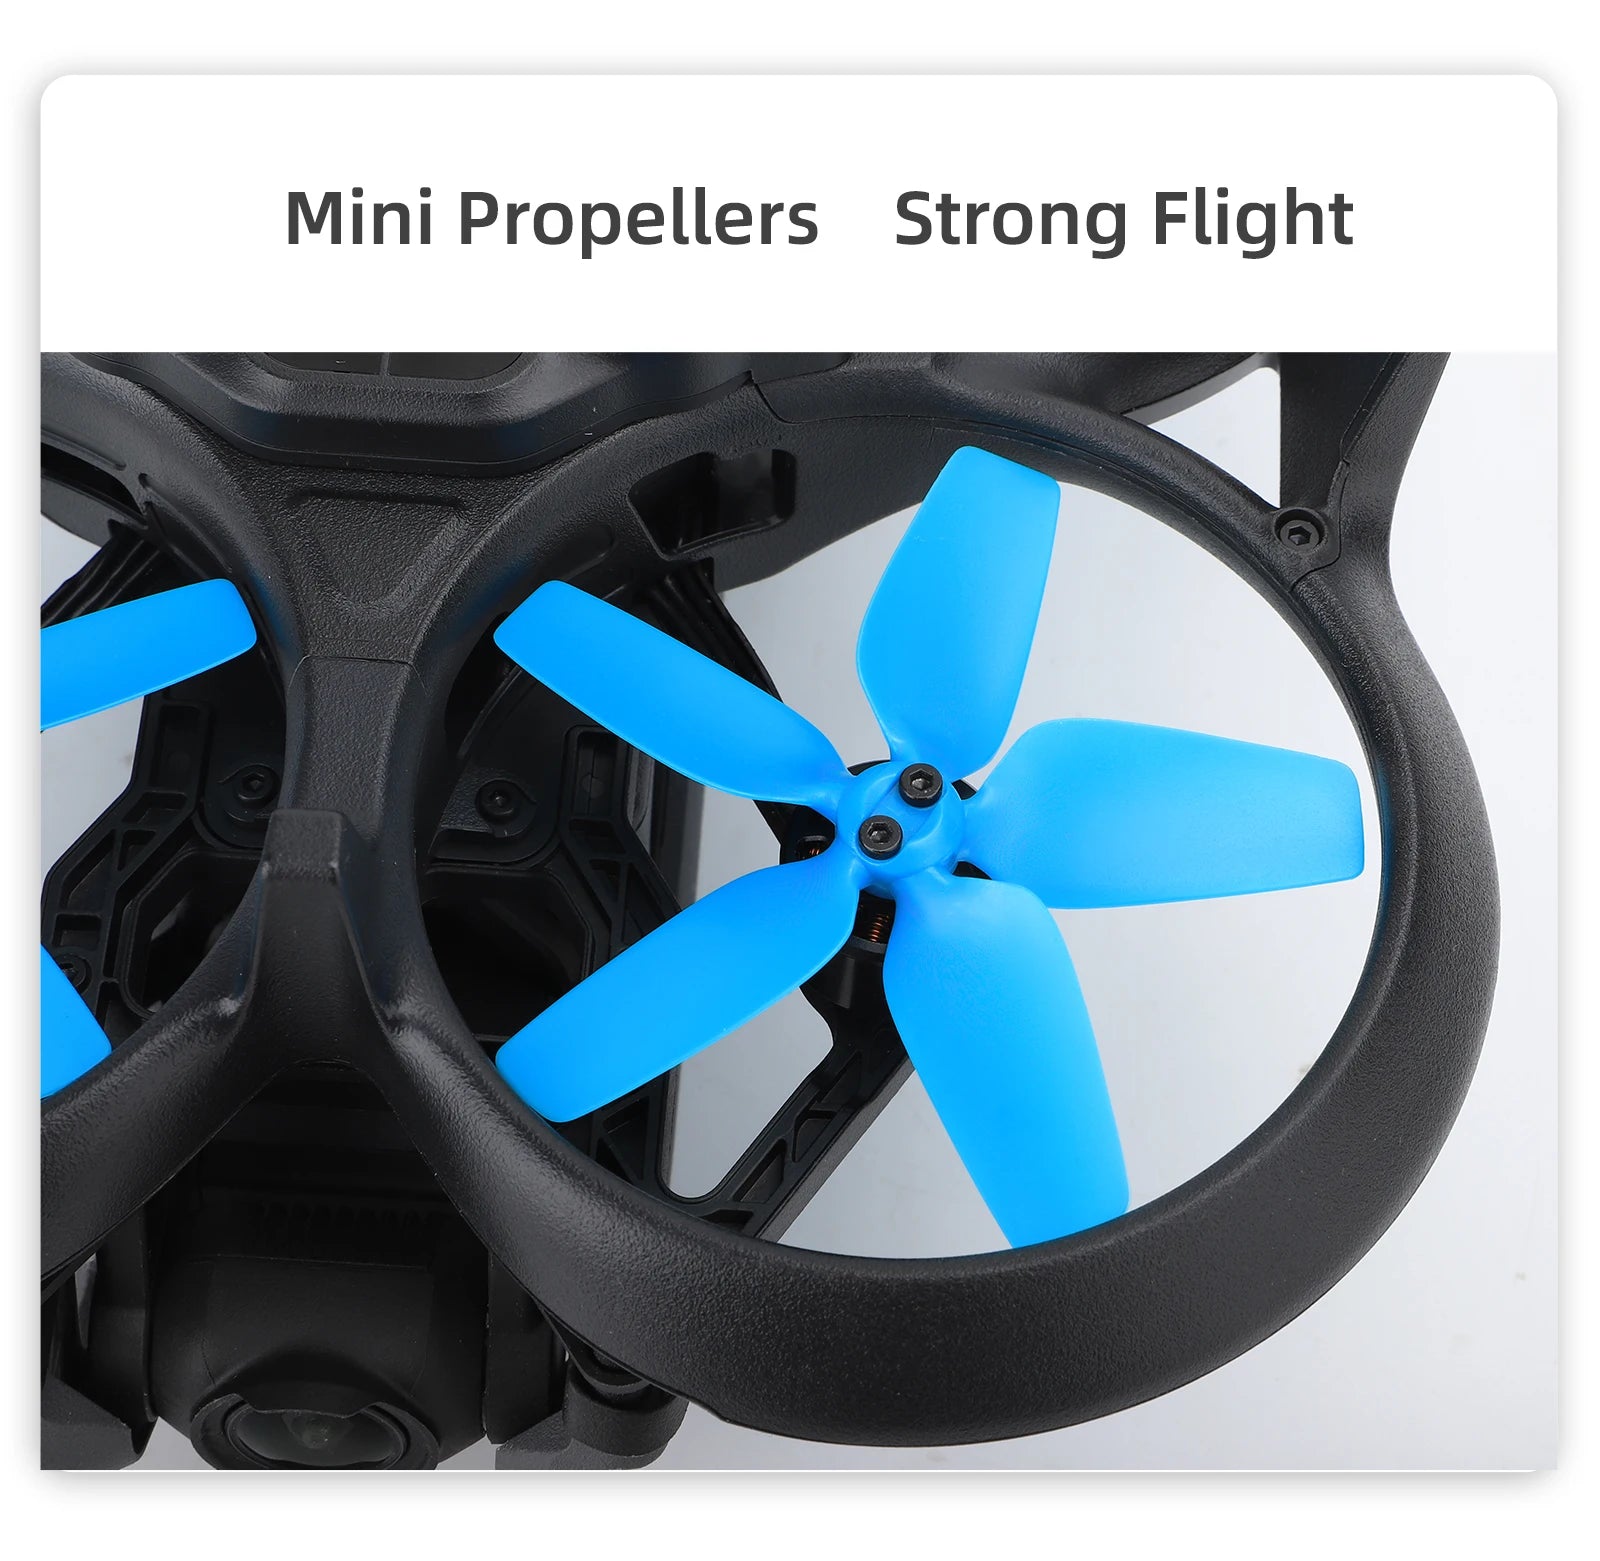 Mini Propellers Strong